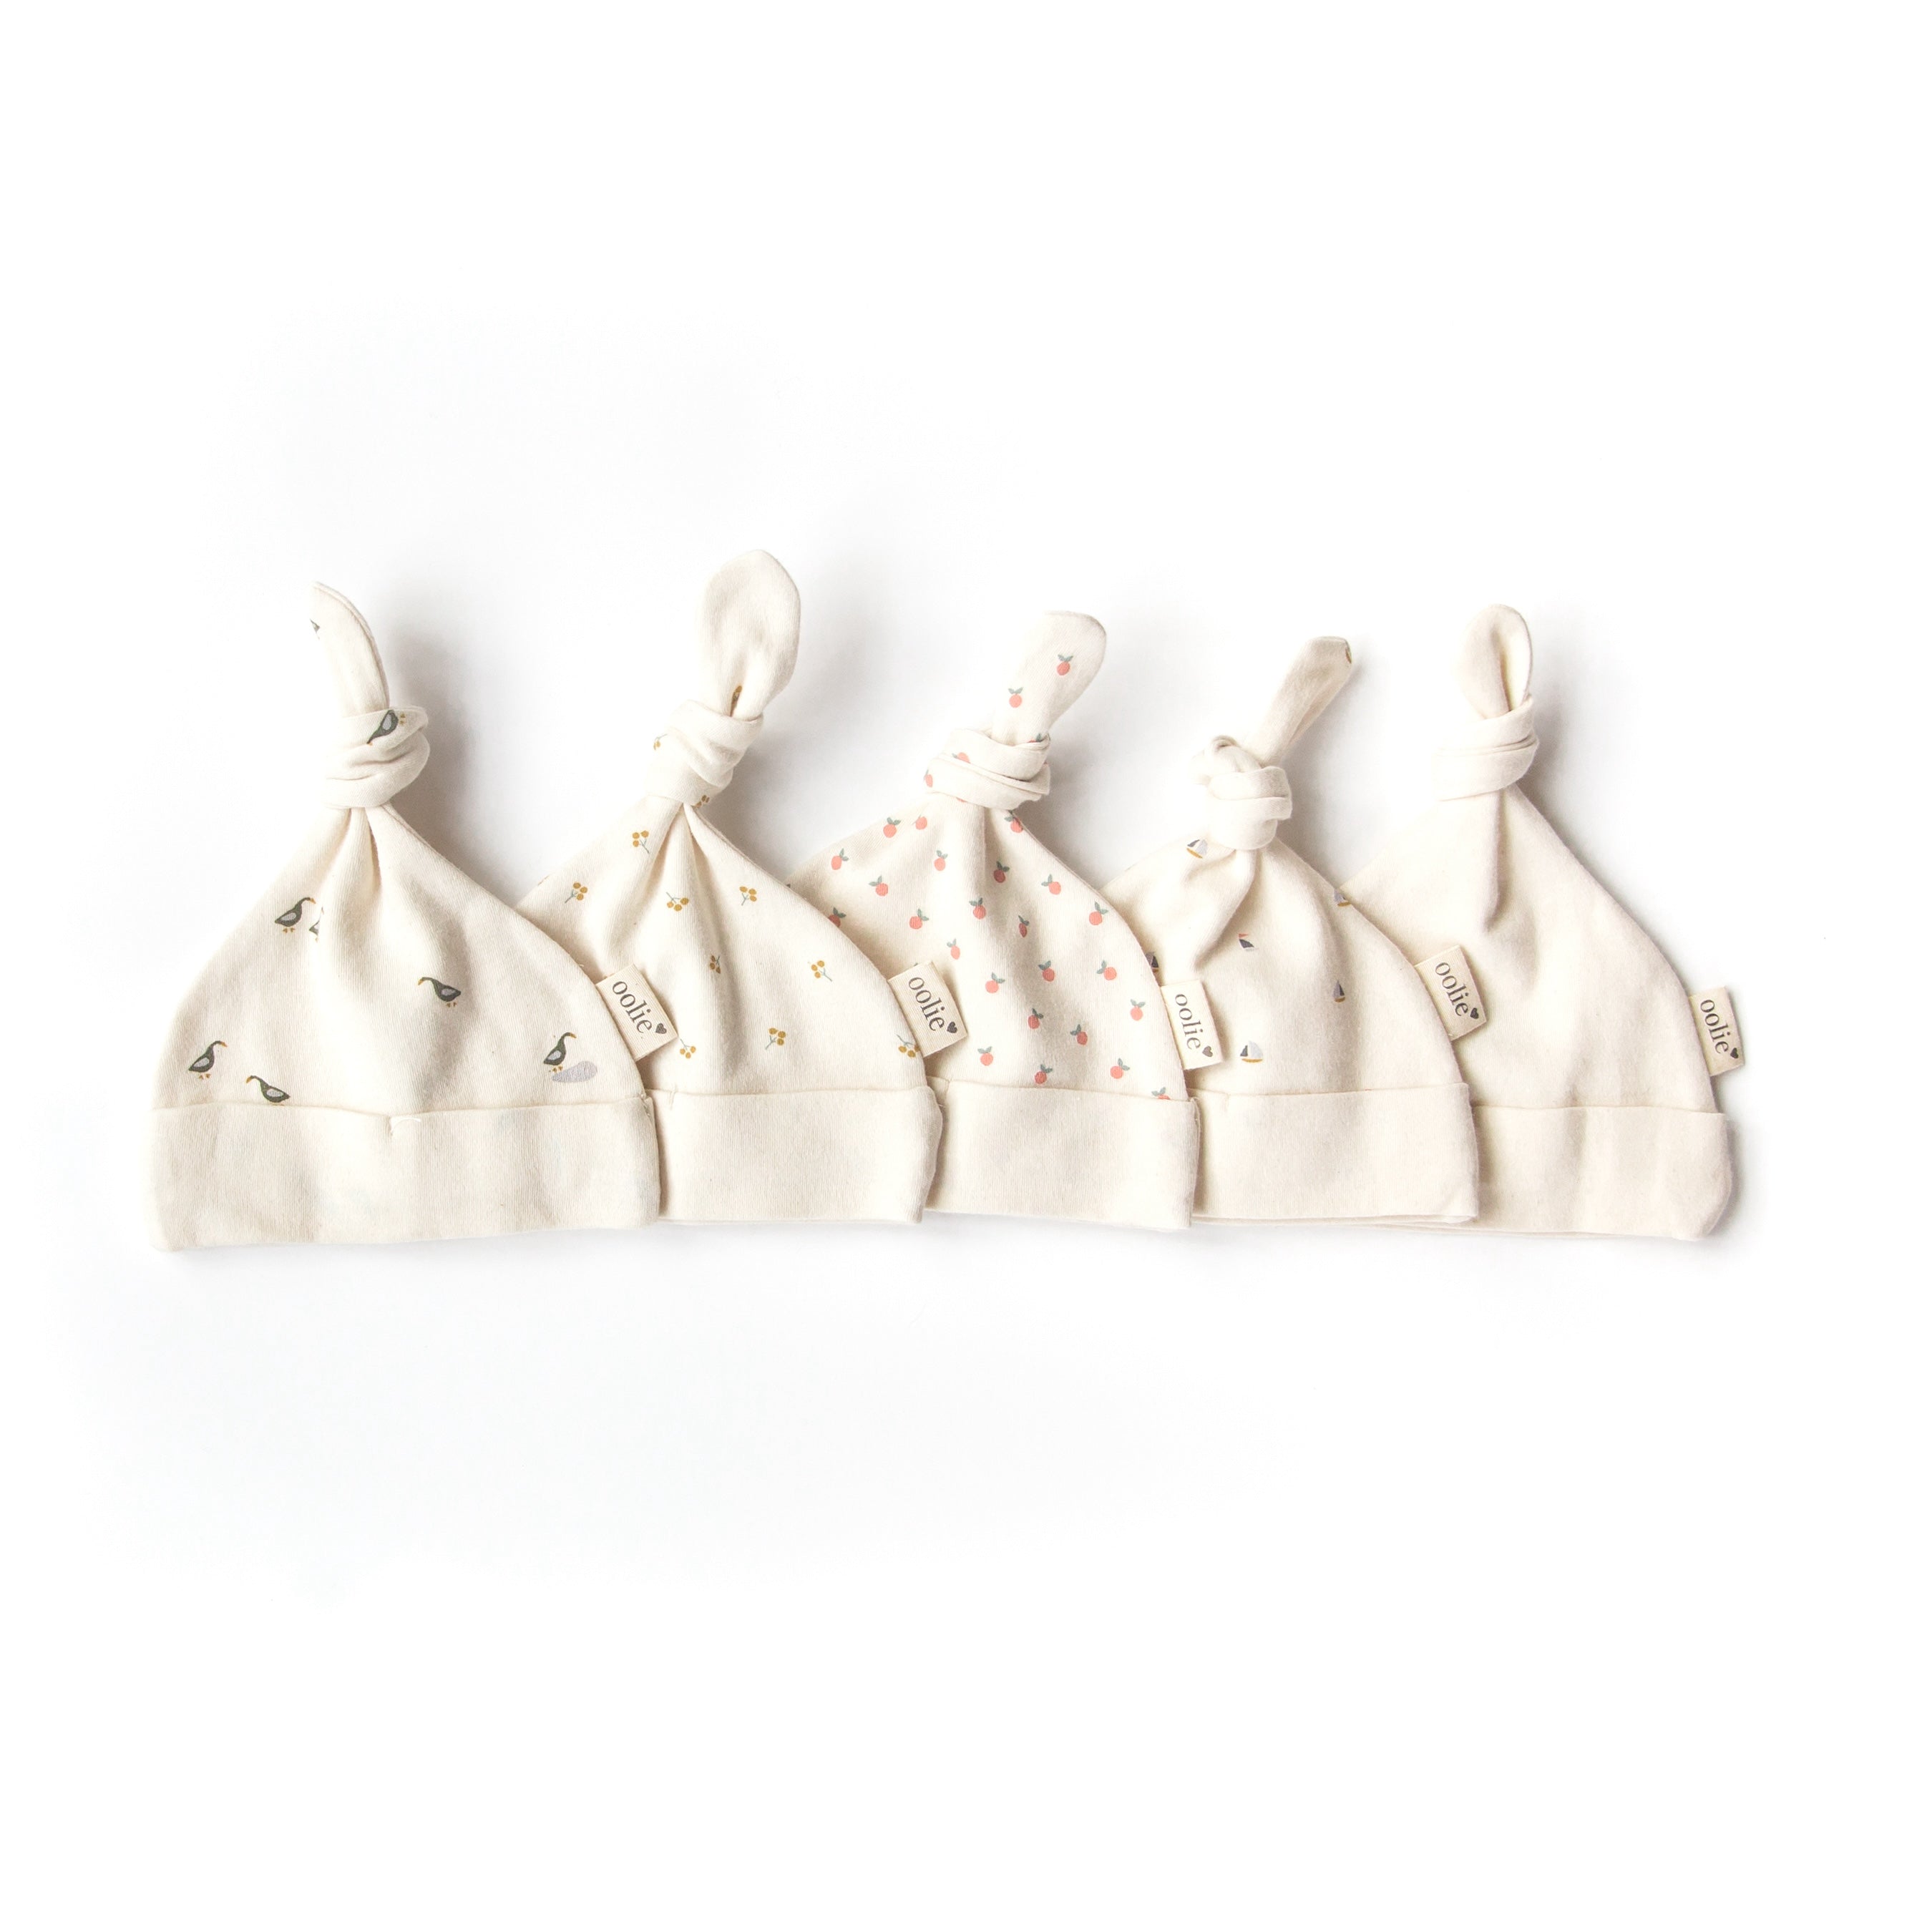 Oolie organic top knot baby hats in five different graphic prints, gently set on a white background.